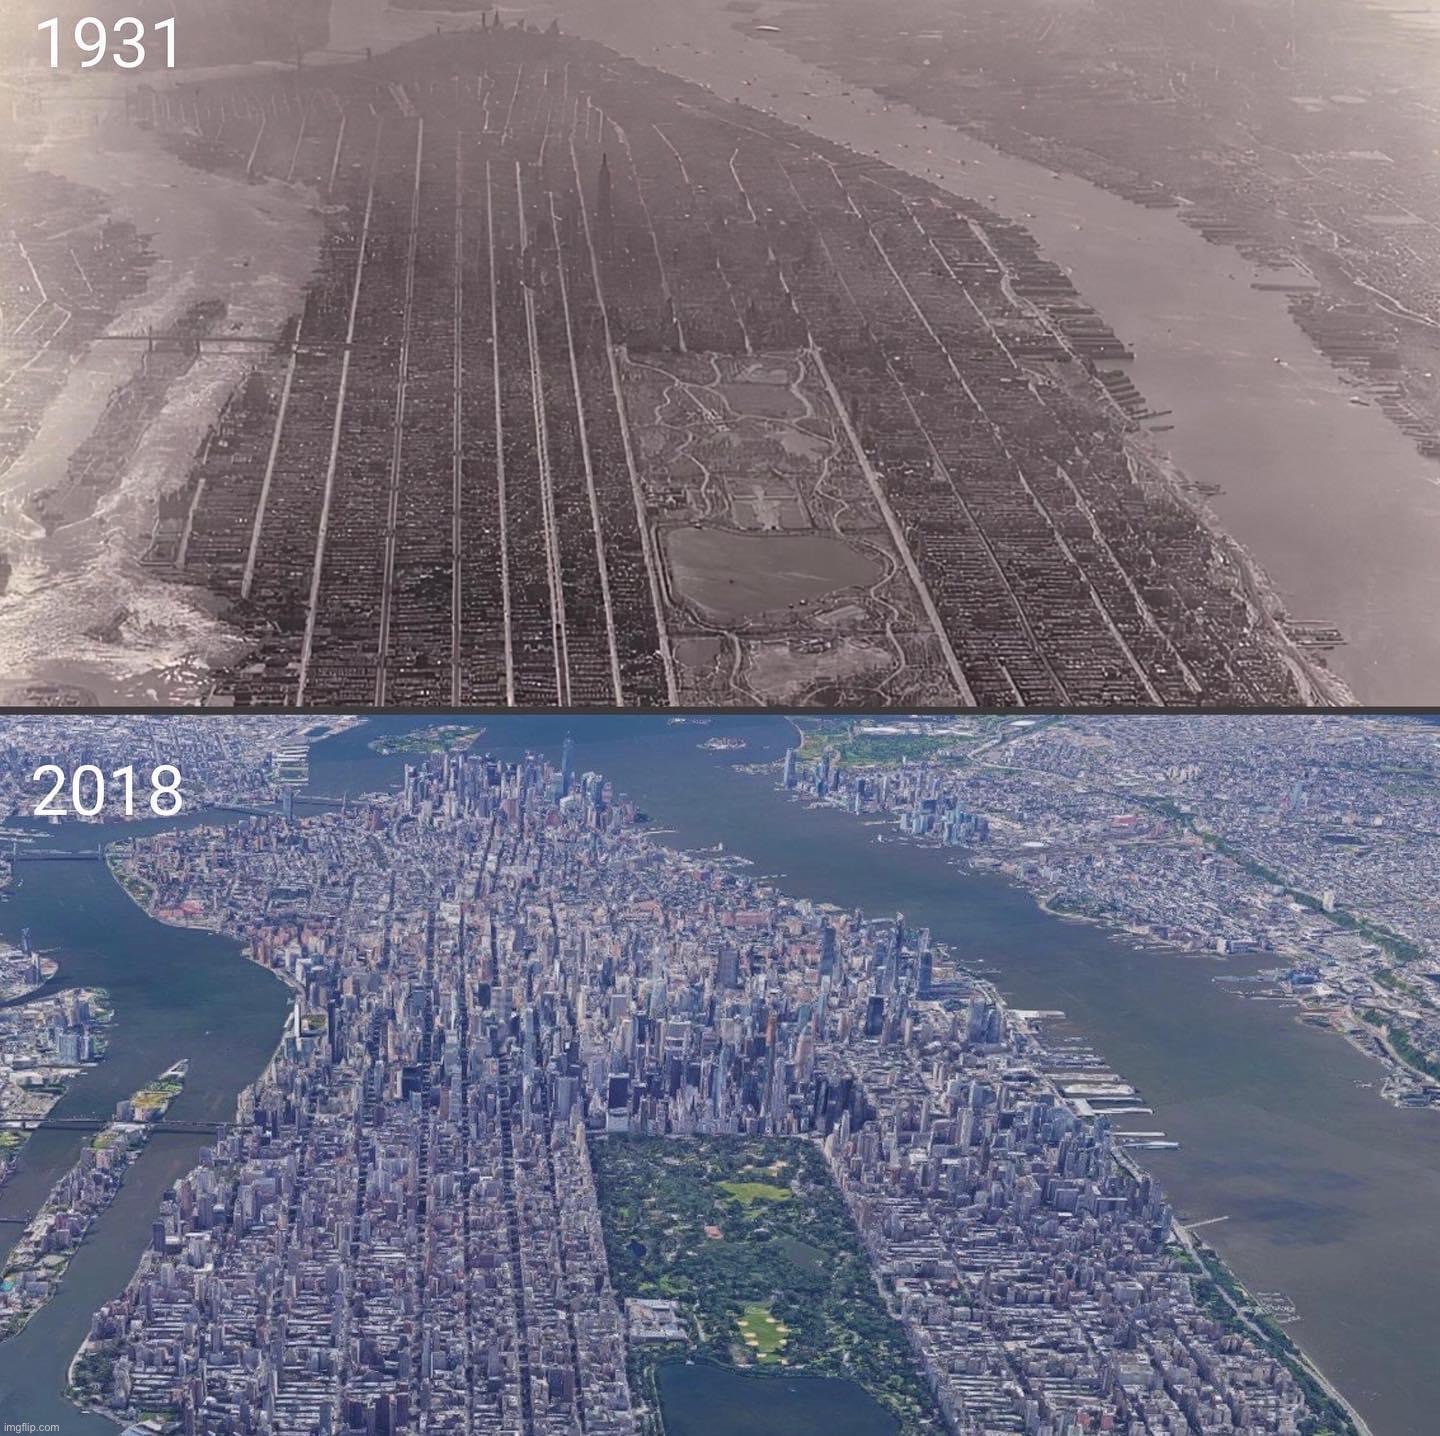 Manhattan then and now | image tagged in manhattan then and now,manhattan,new york city,new york,then and now,city | made w/ Imgflip meme maker